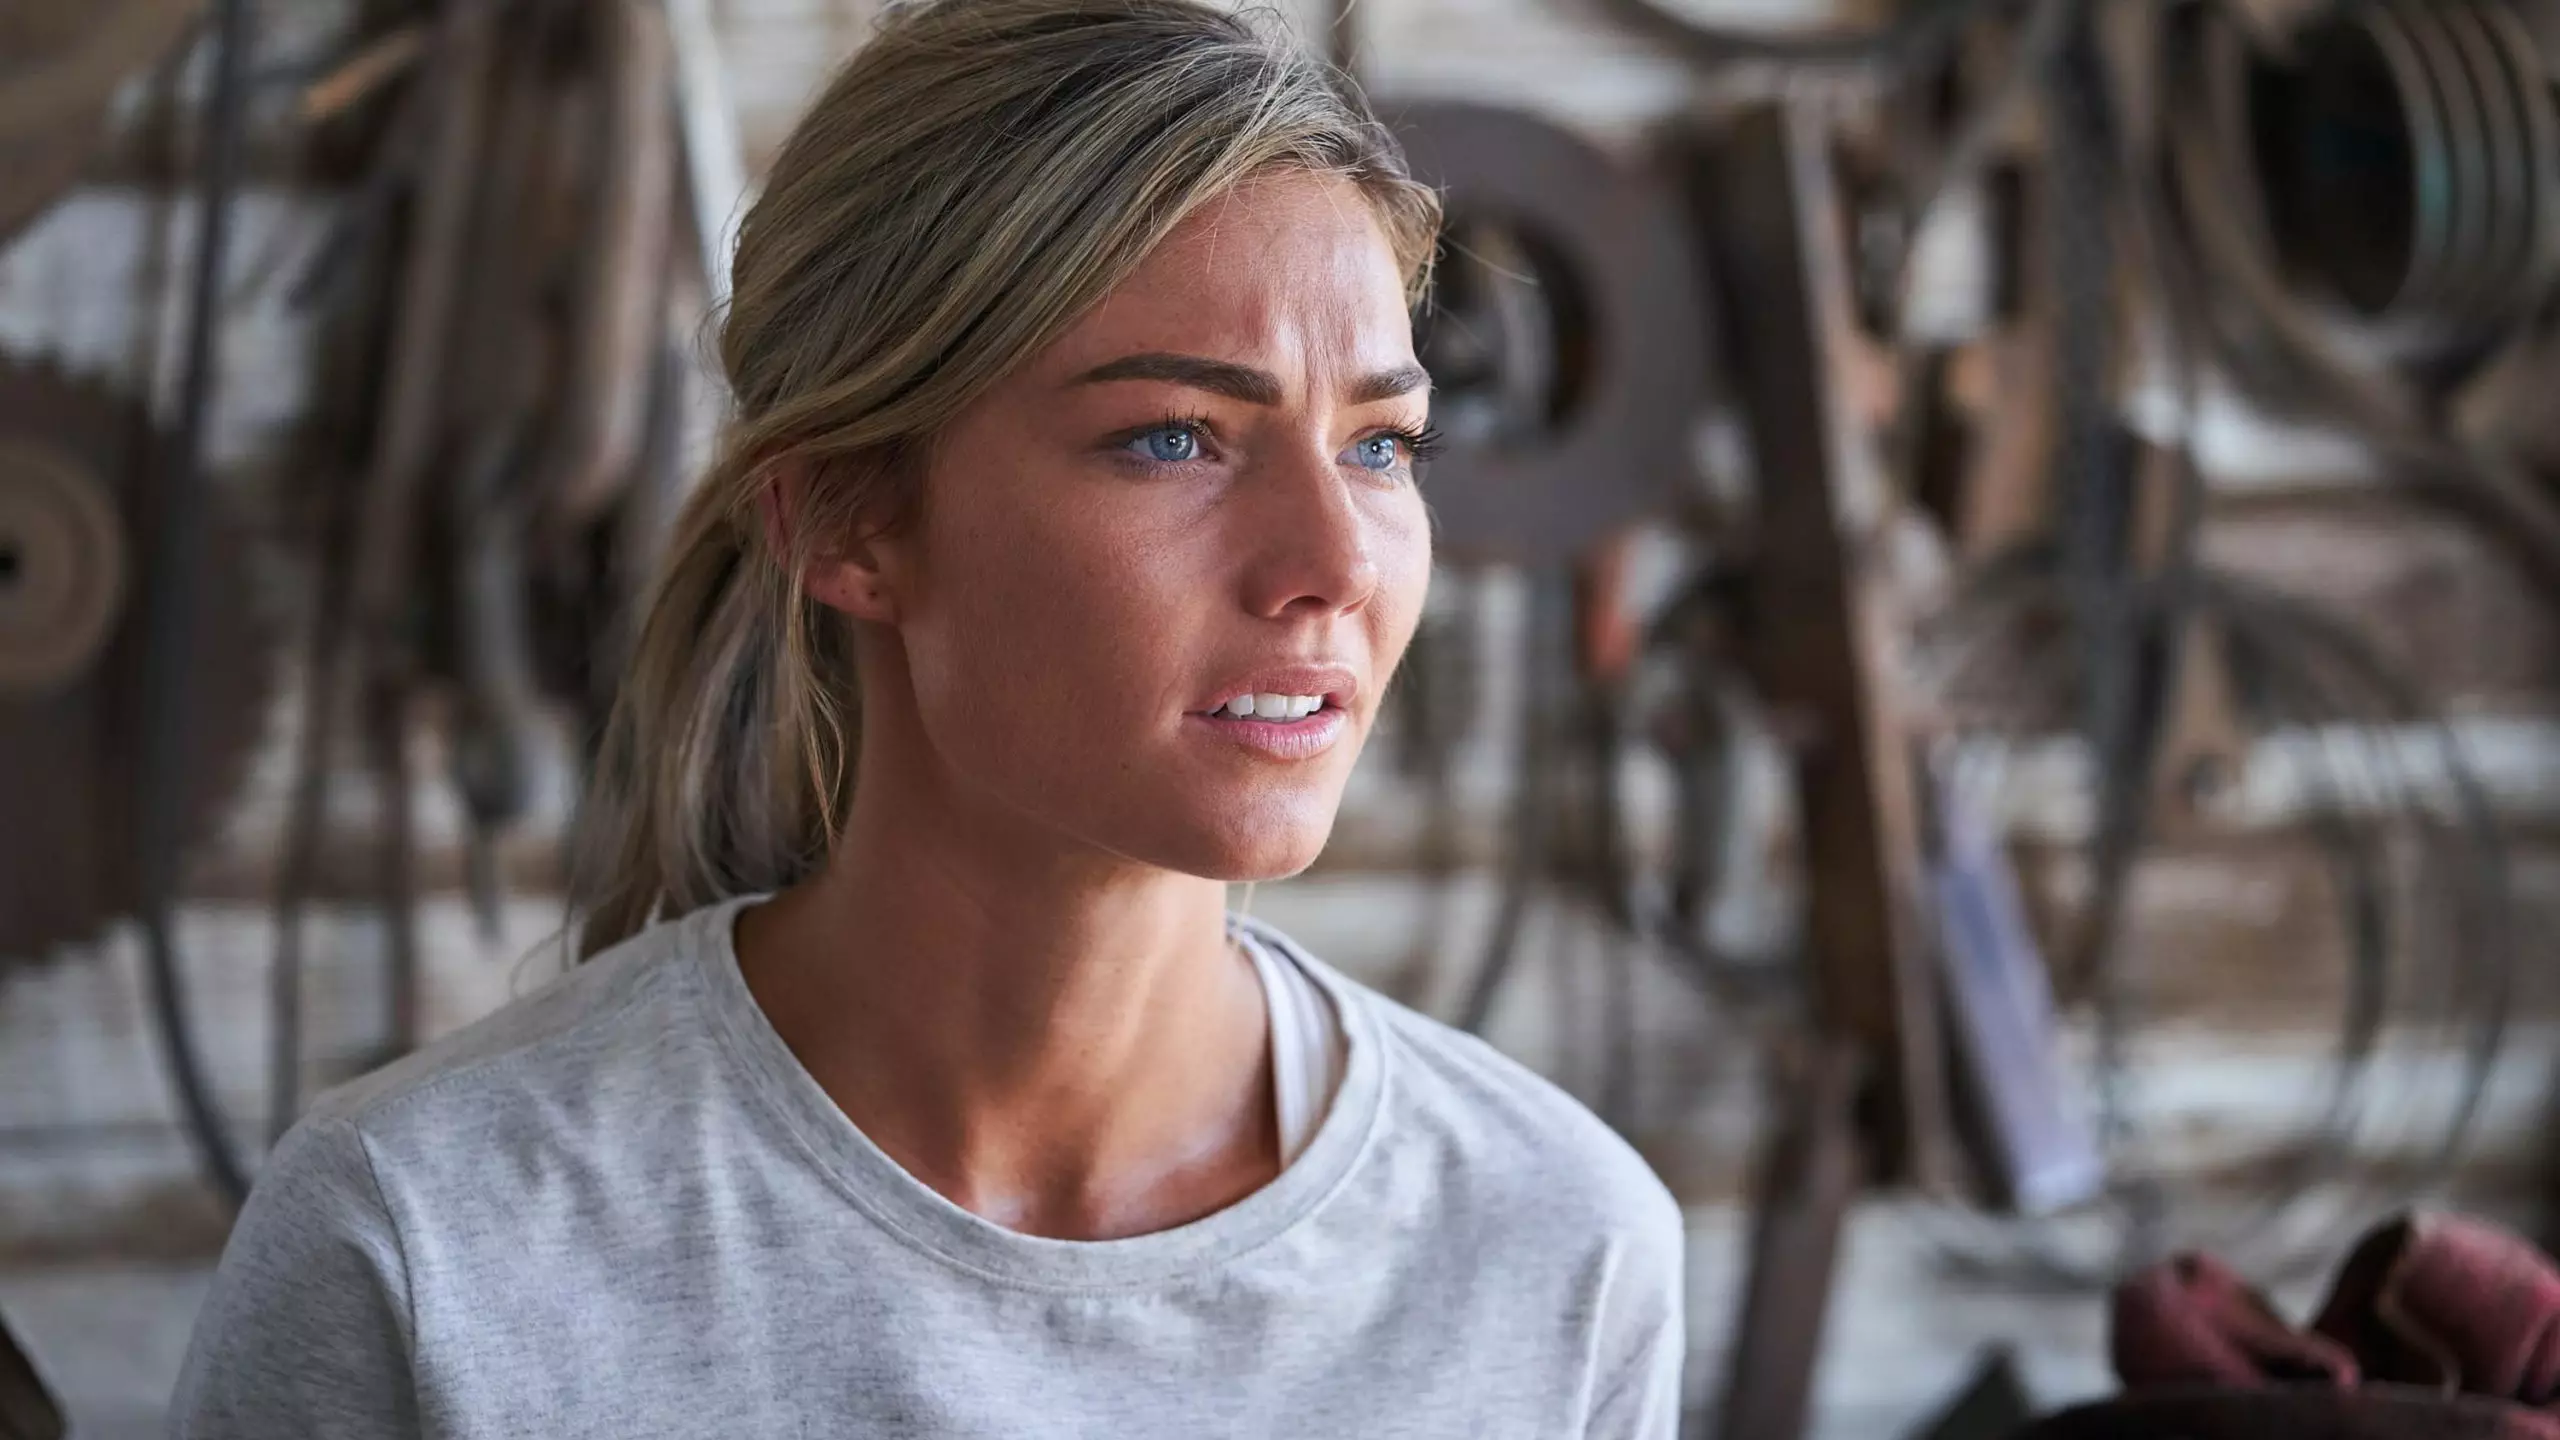 Sam Frost Won't Be Kicked Off Home And Away After Revealing She's Not Vaccinated